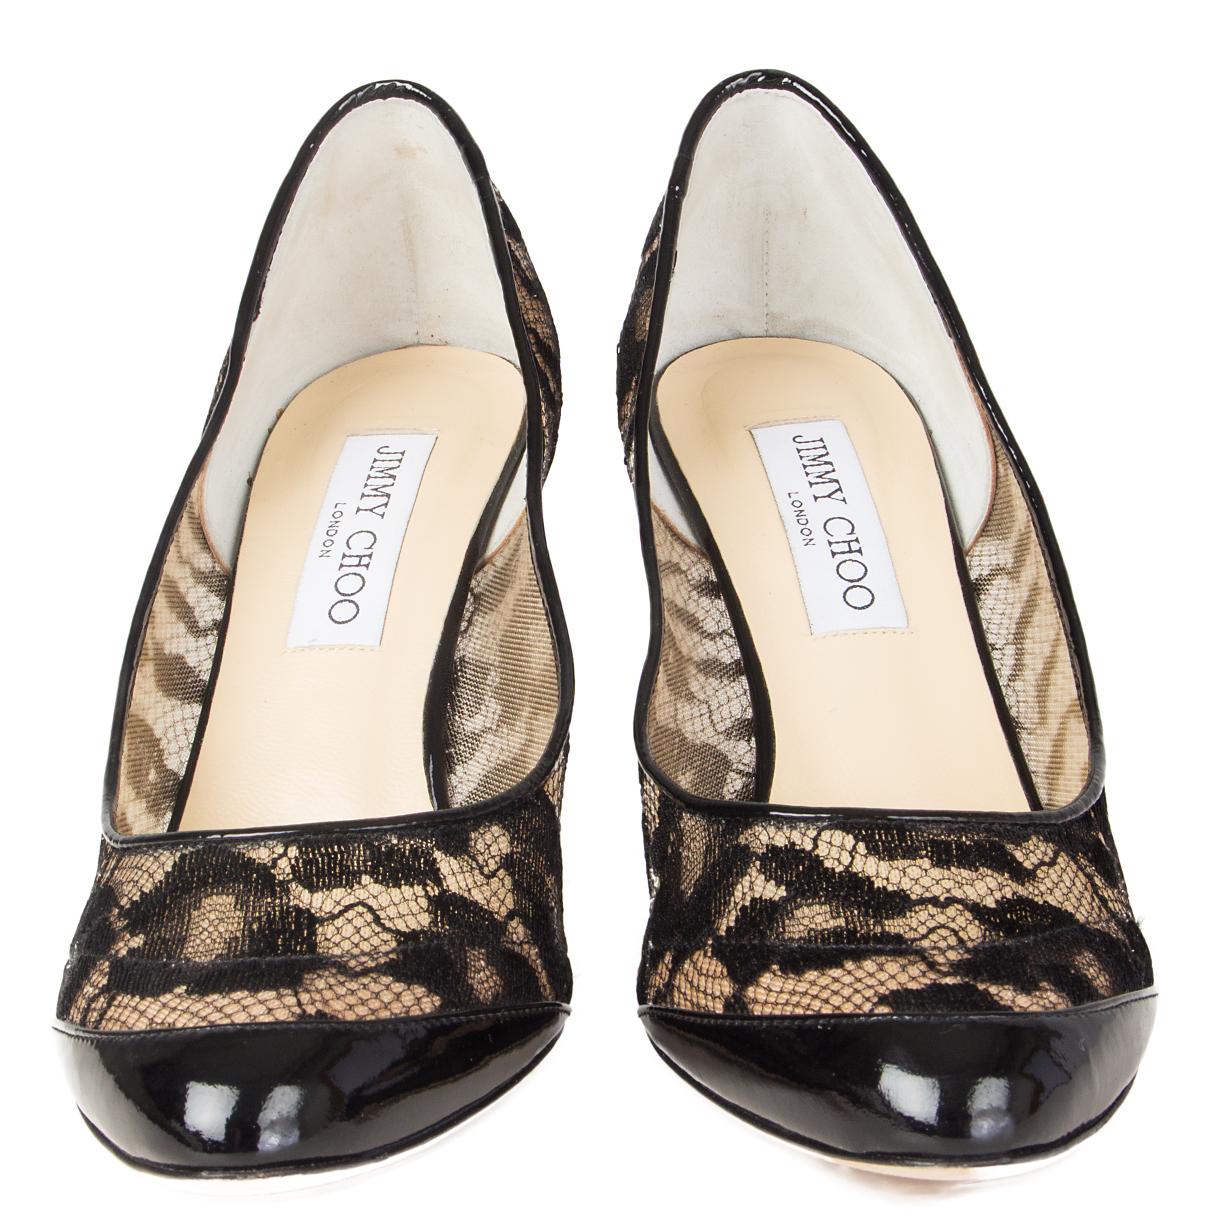 100% authentic Jimmy Choo 'Bizmo' pumps in black lace and nude mesh featuring black patent tip and piping. Have been worn once and are in excellent condition.

Measurements
Imprinted Size	38
Shoe Size	38
Inside Sole	24.5cm (9.6in)
Width	7.5cm